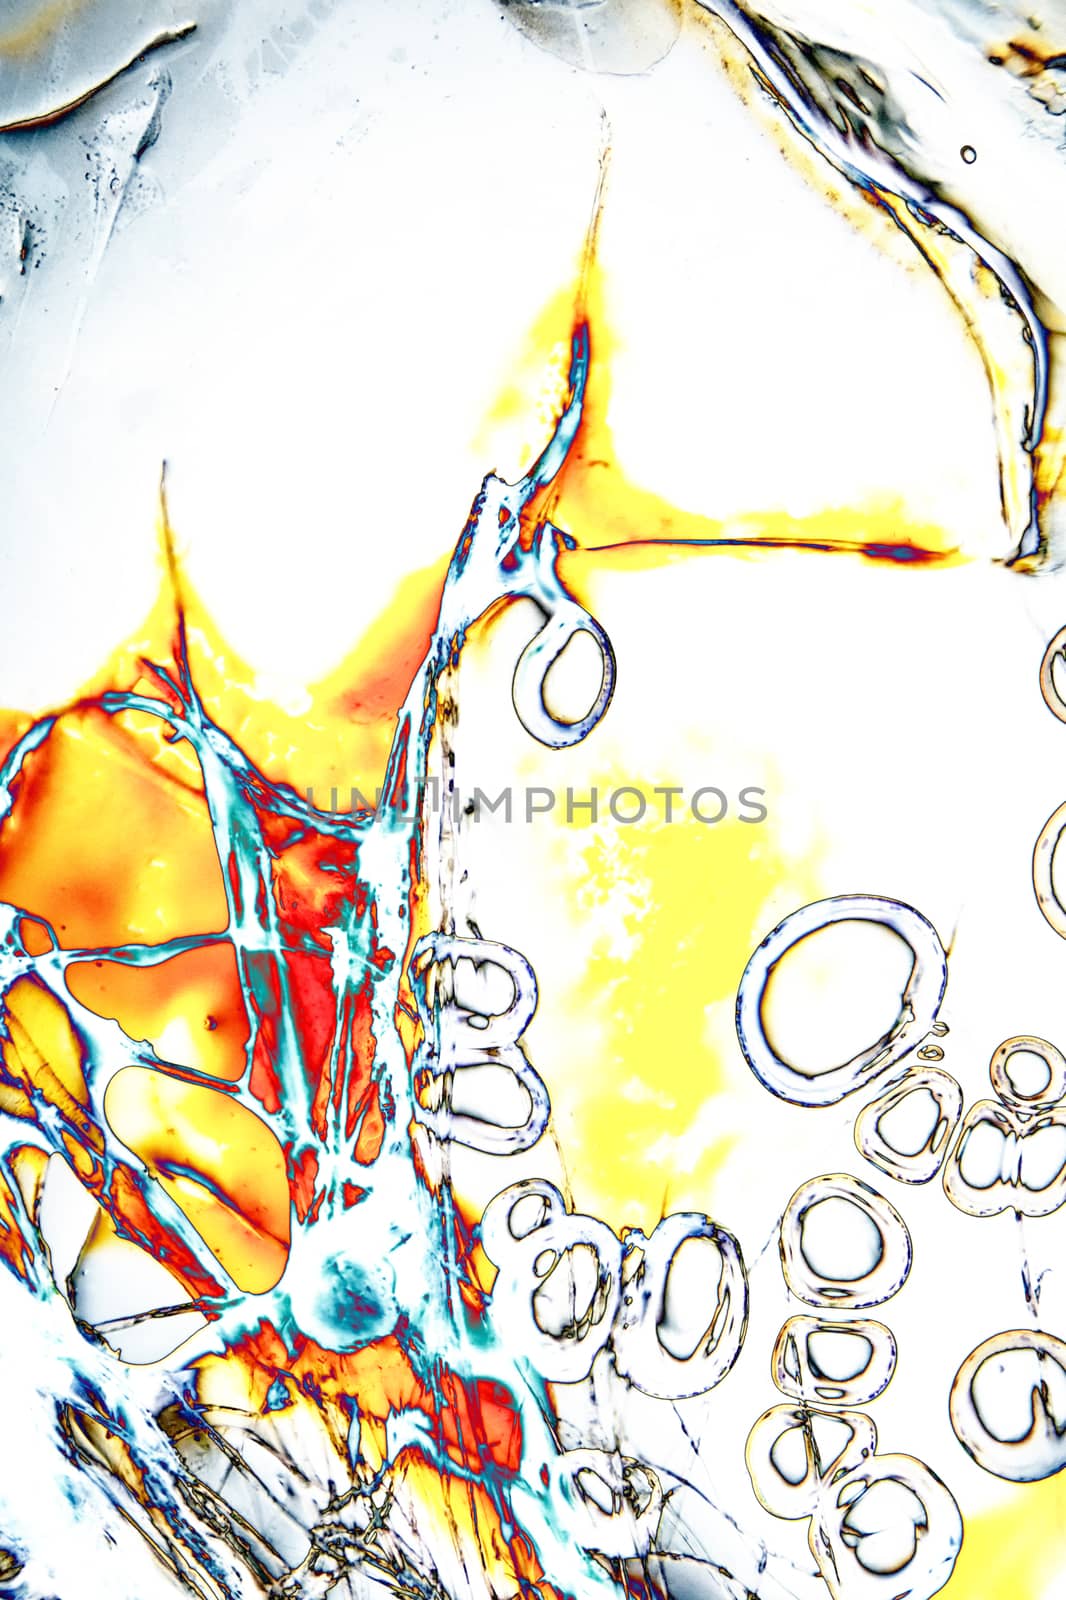 Light Graphics: Microphoto of translucent structures